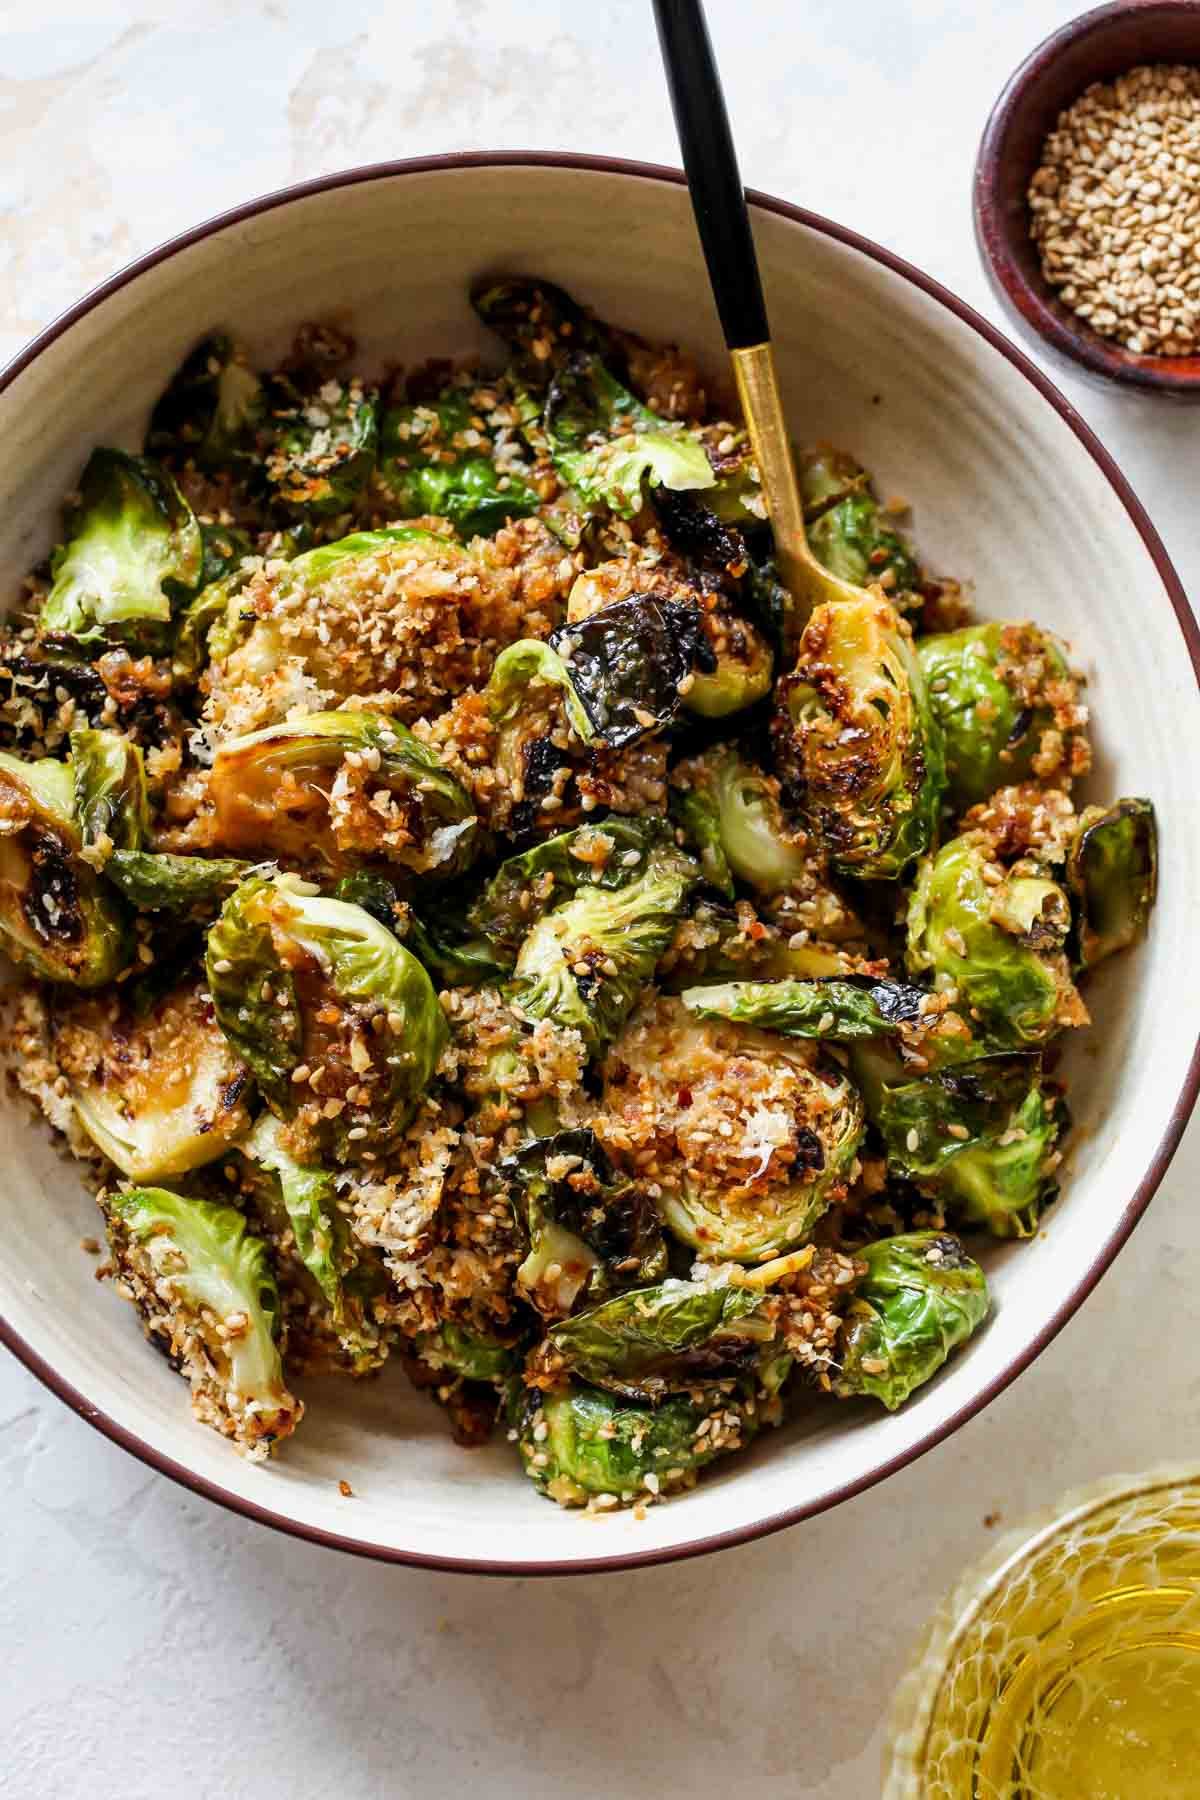 Miso Sesame Glazed Brussel Sprouts